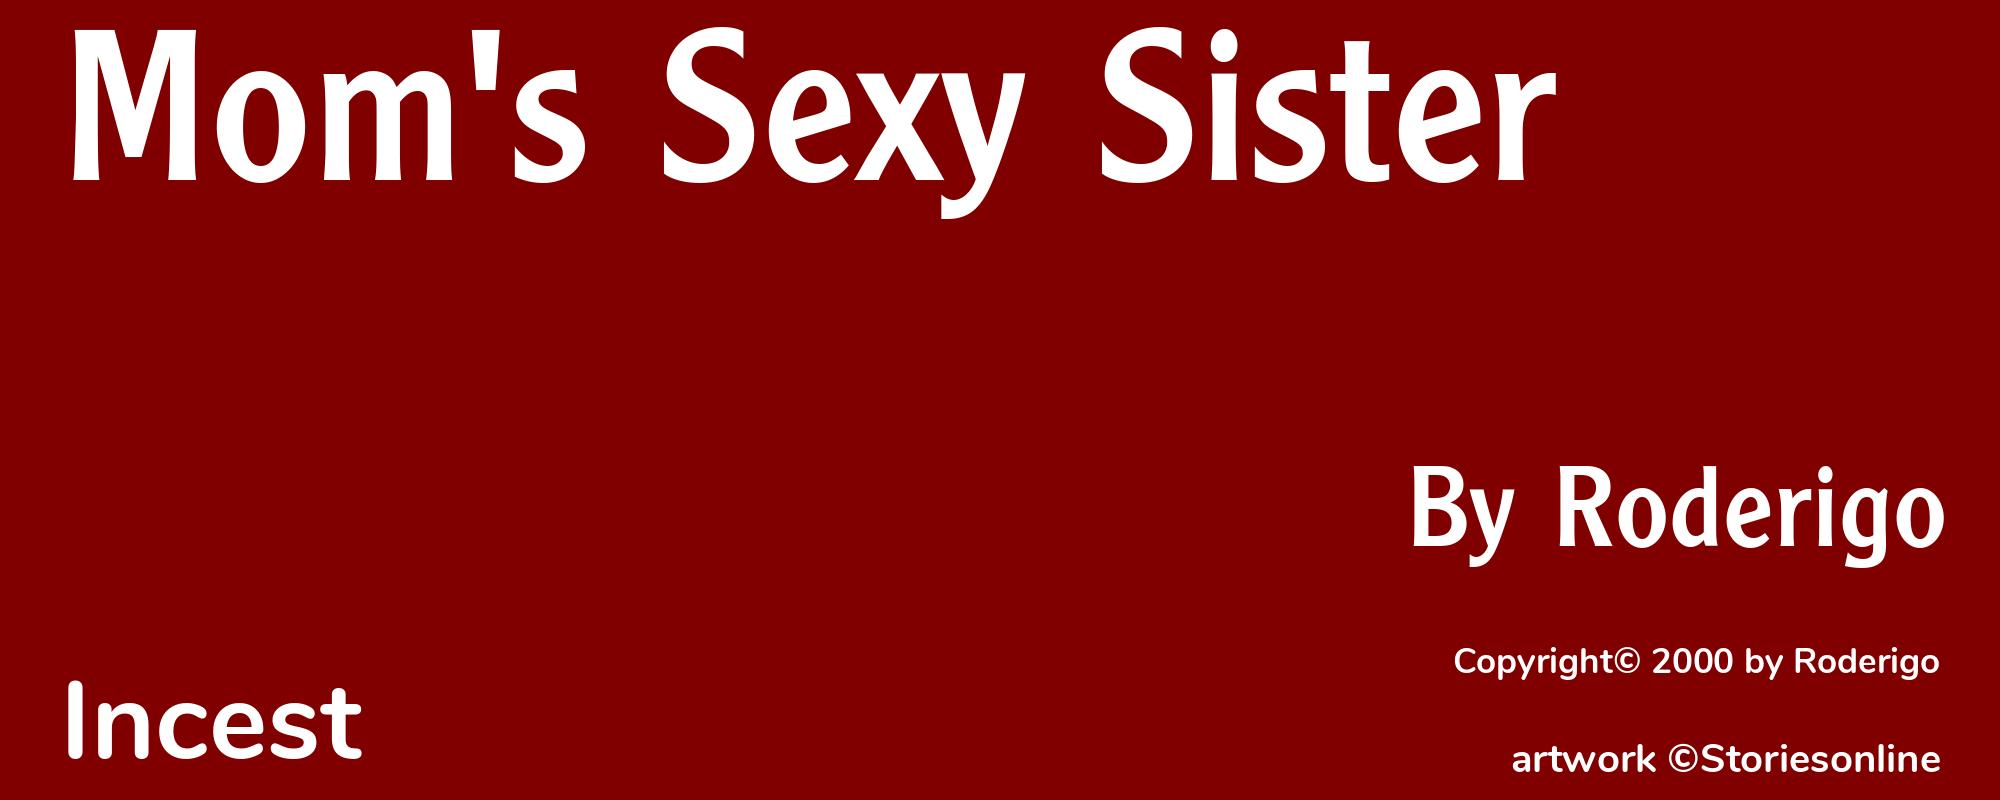 Mom's Sexy Sister - Cover